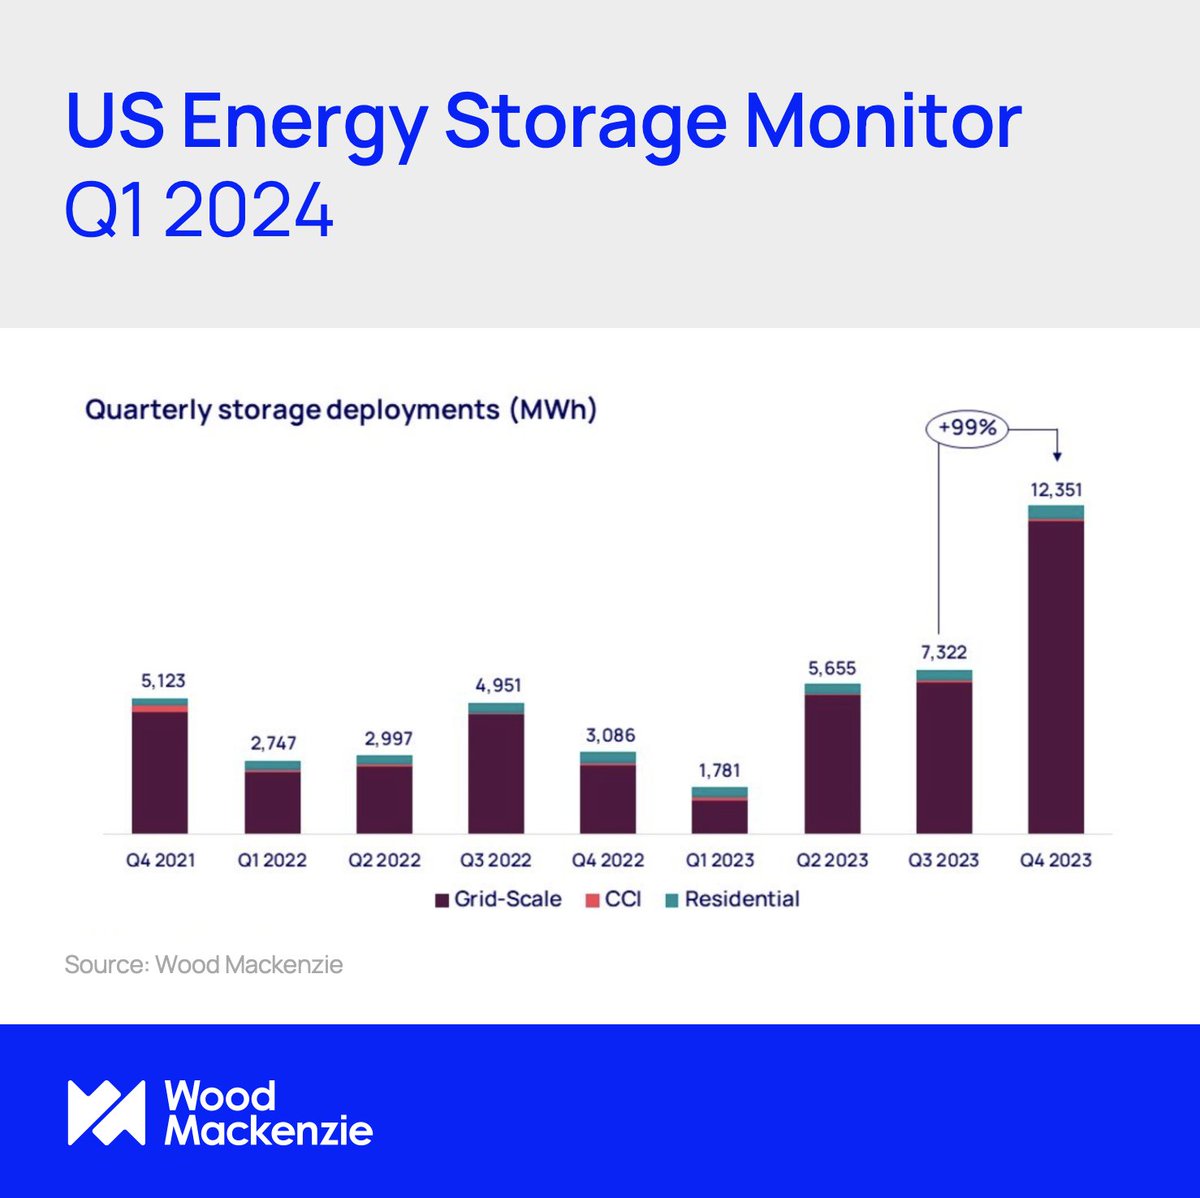 US grid-scale deployment broke installation records in Q4, with 3,983 MW and 11,769 MWh installed, a 113% increase from Q3 in MW terms. Download our complimentary executive summary to learn more: okt.to/TANMi8